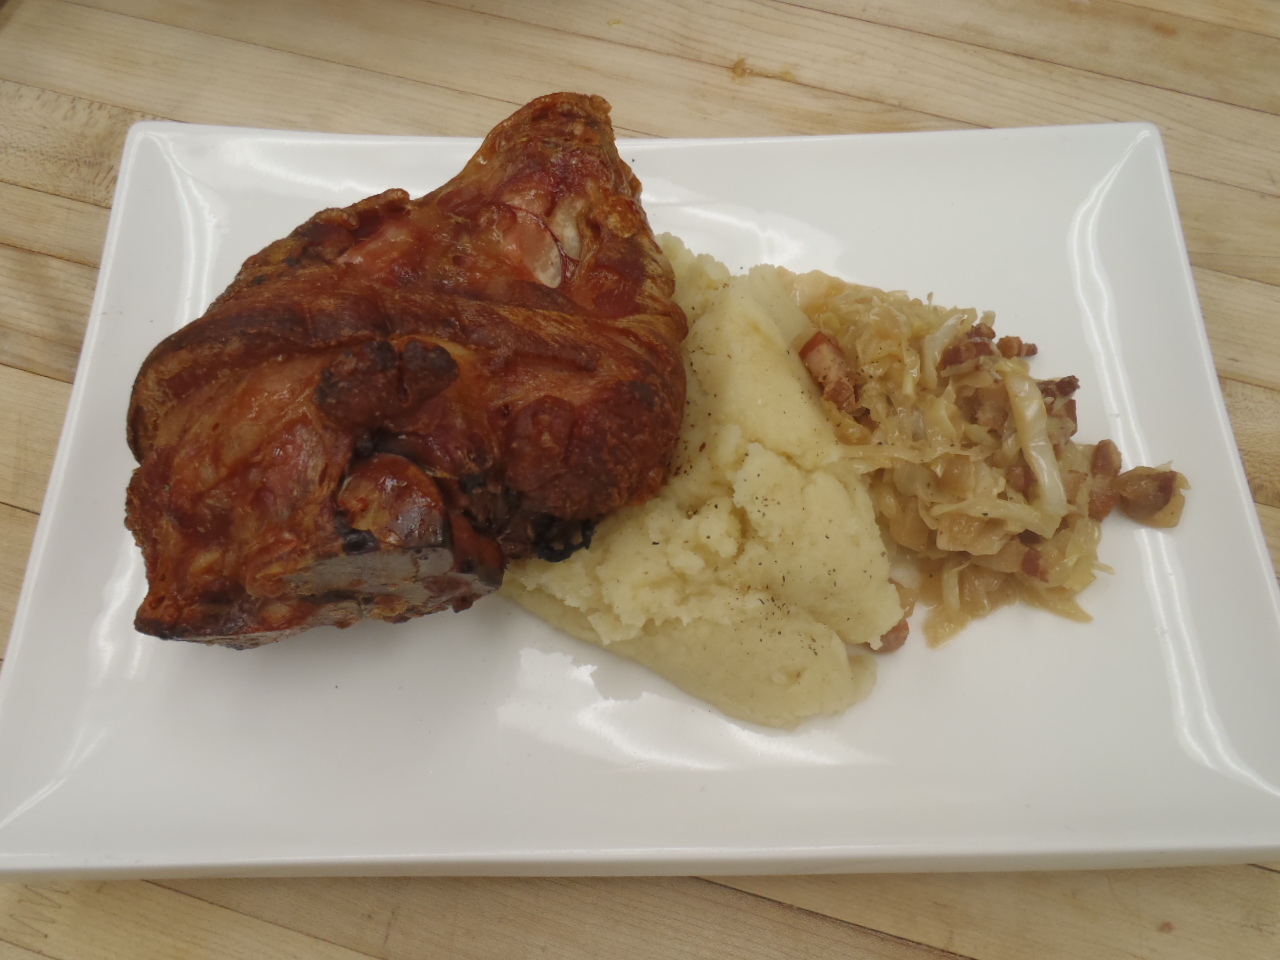 A roast ham hock with mash potatoes and braised cabbage